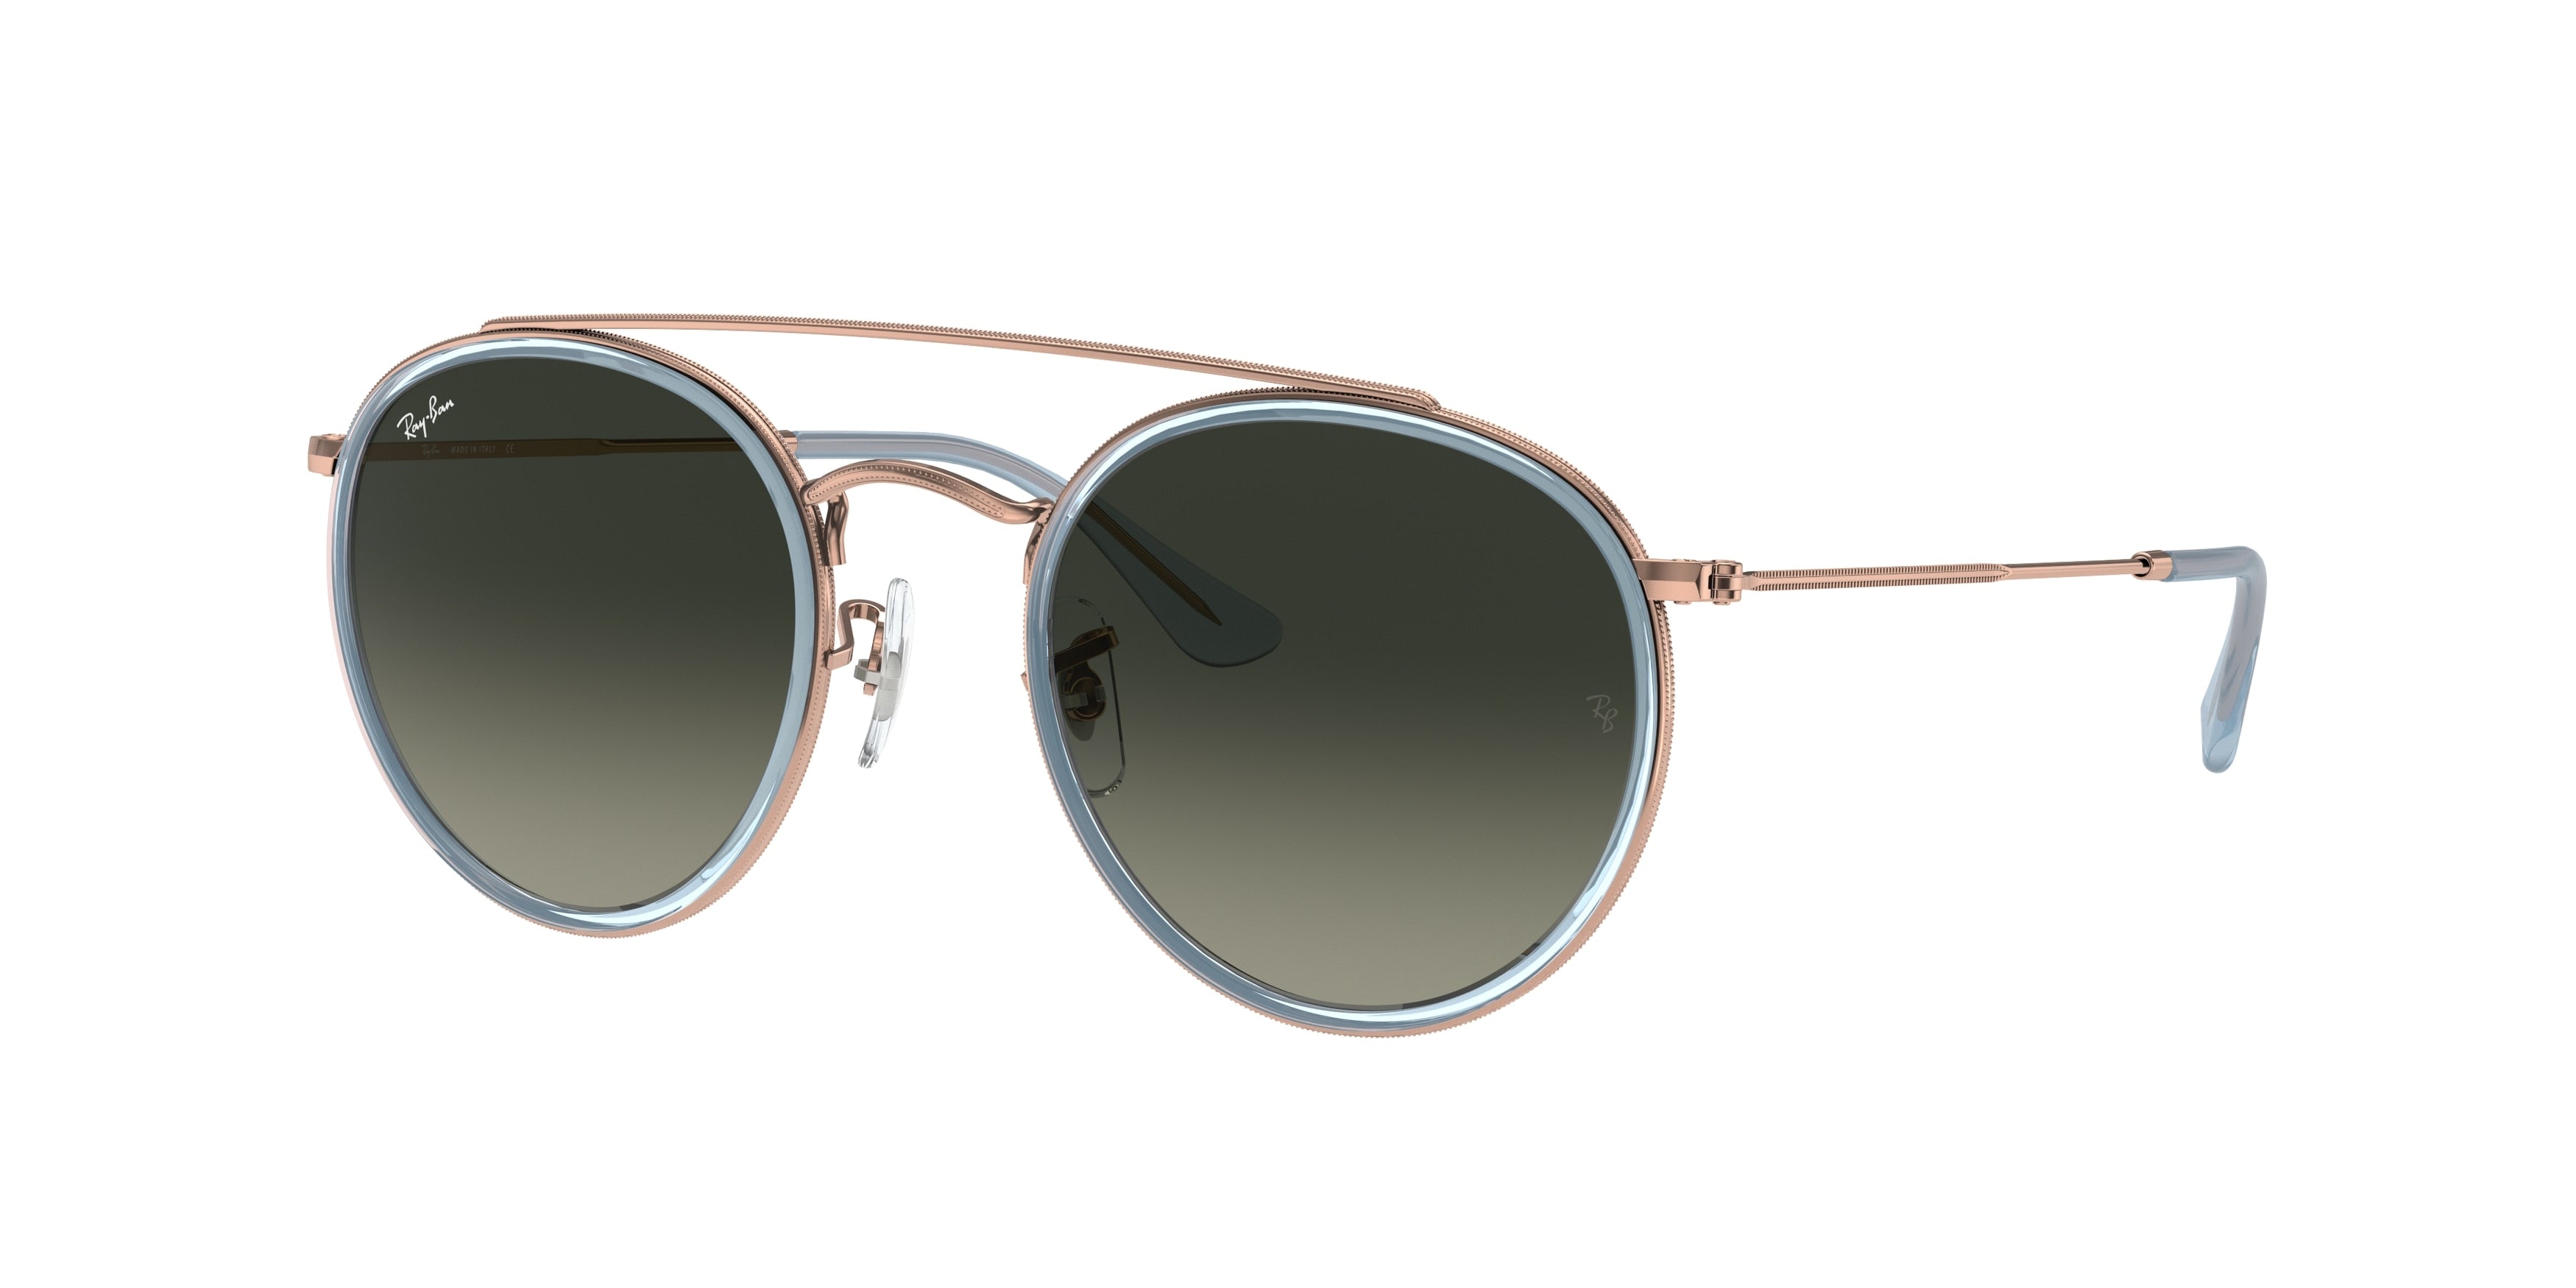 Ray-Ban RB3647N Round Sunglasses  906771-Copper 51-145-22 - Color Map Copper